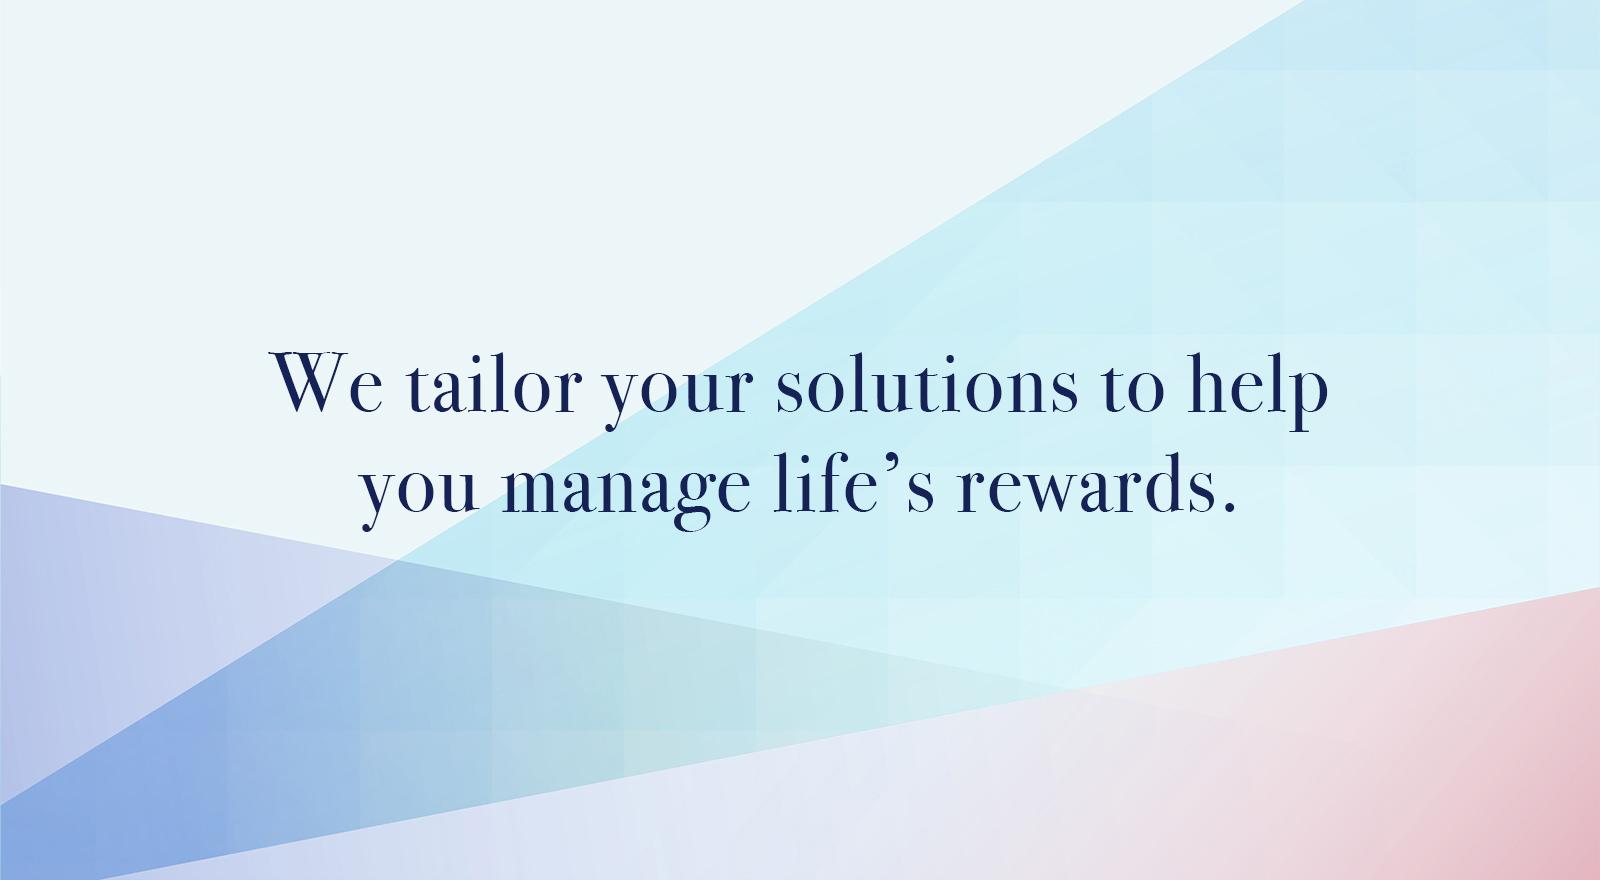 We tailor your solutions